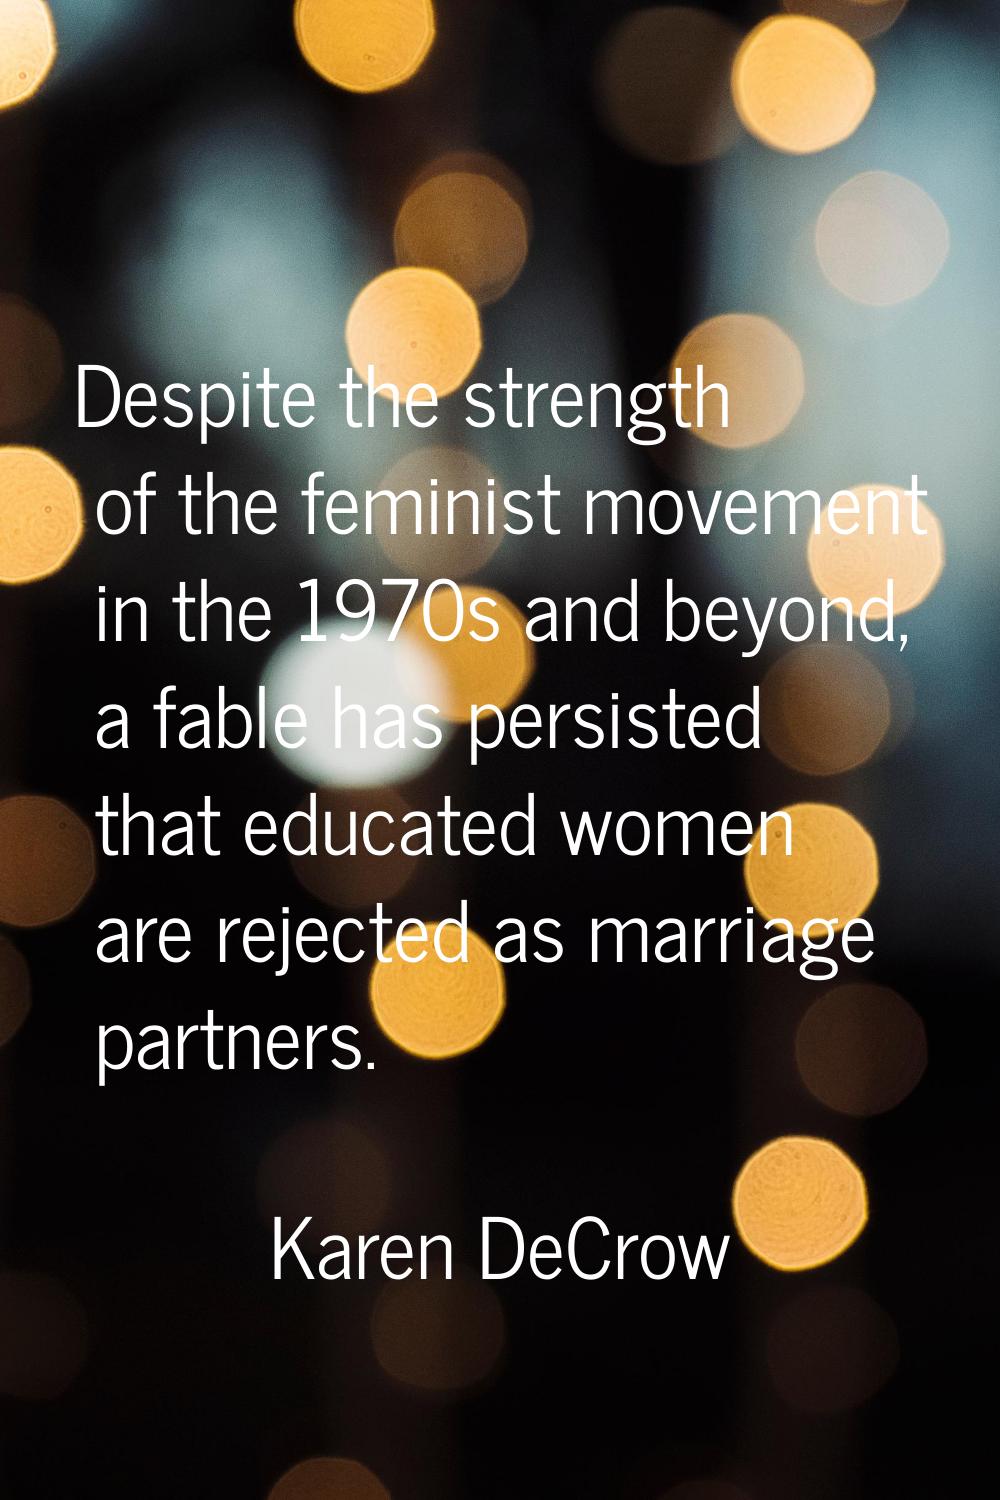 Despite the strength of the feminist movement in the 1970s and beyond, a fable has persisted that e